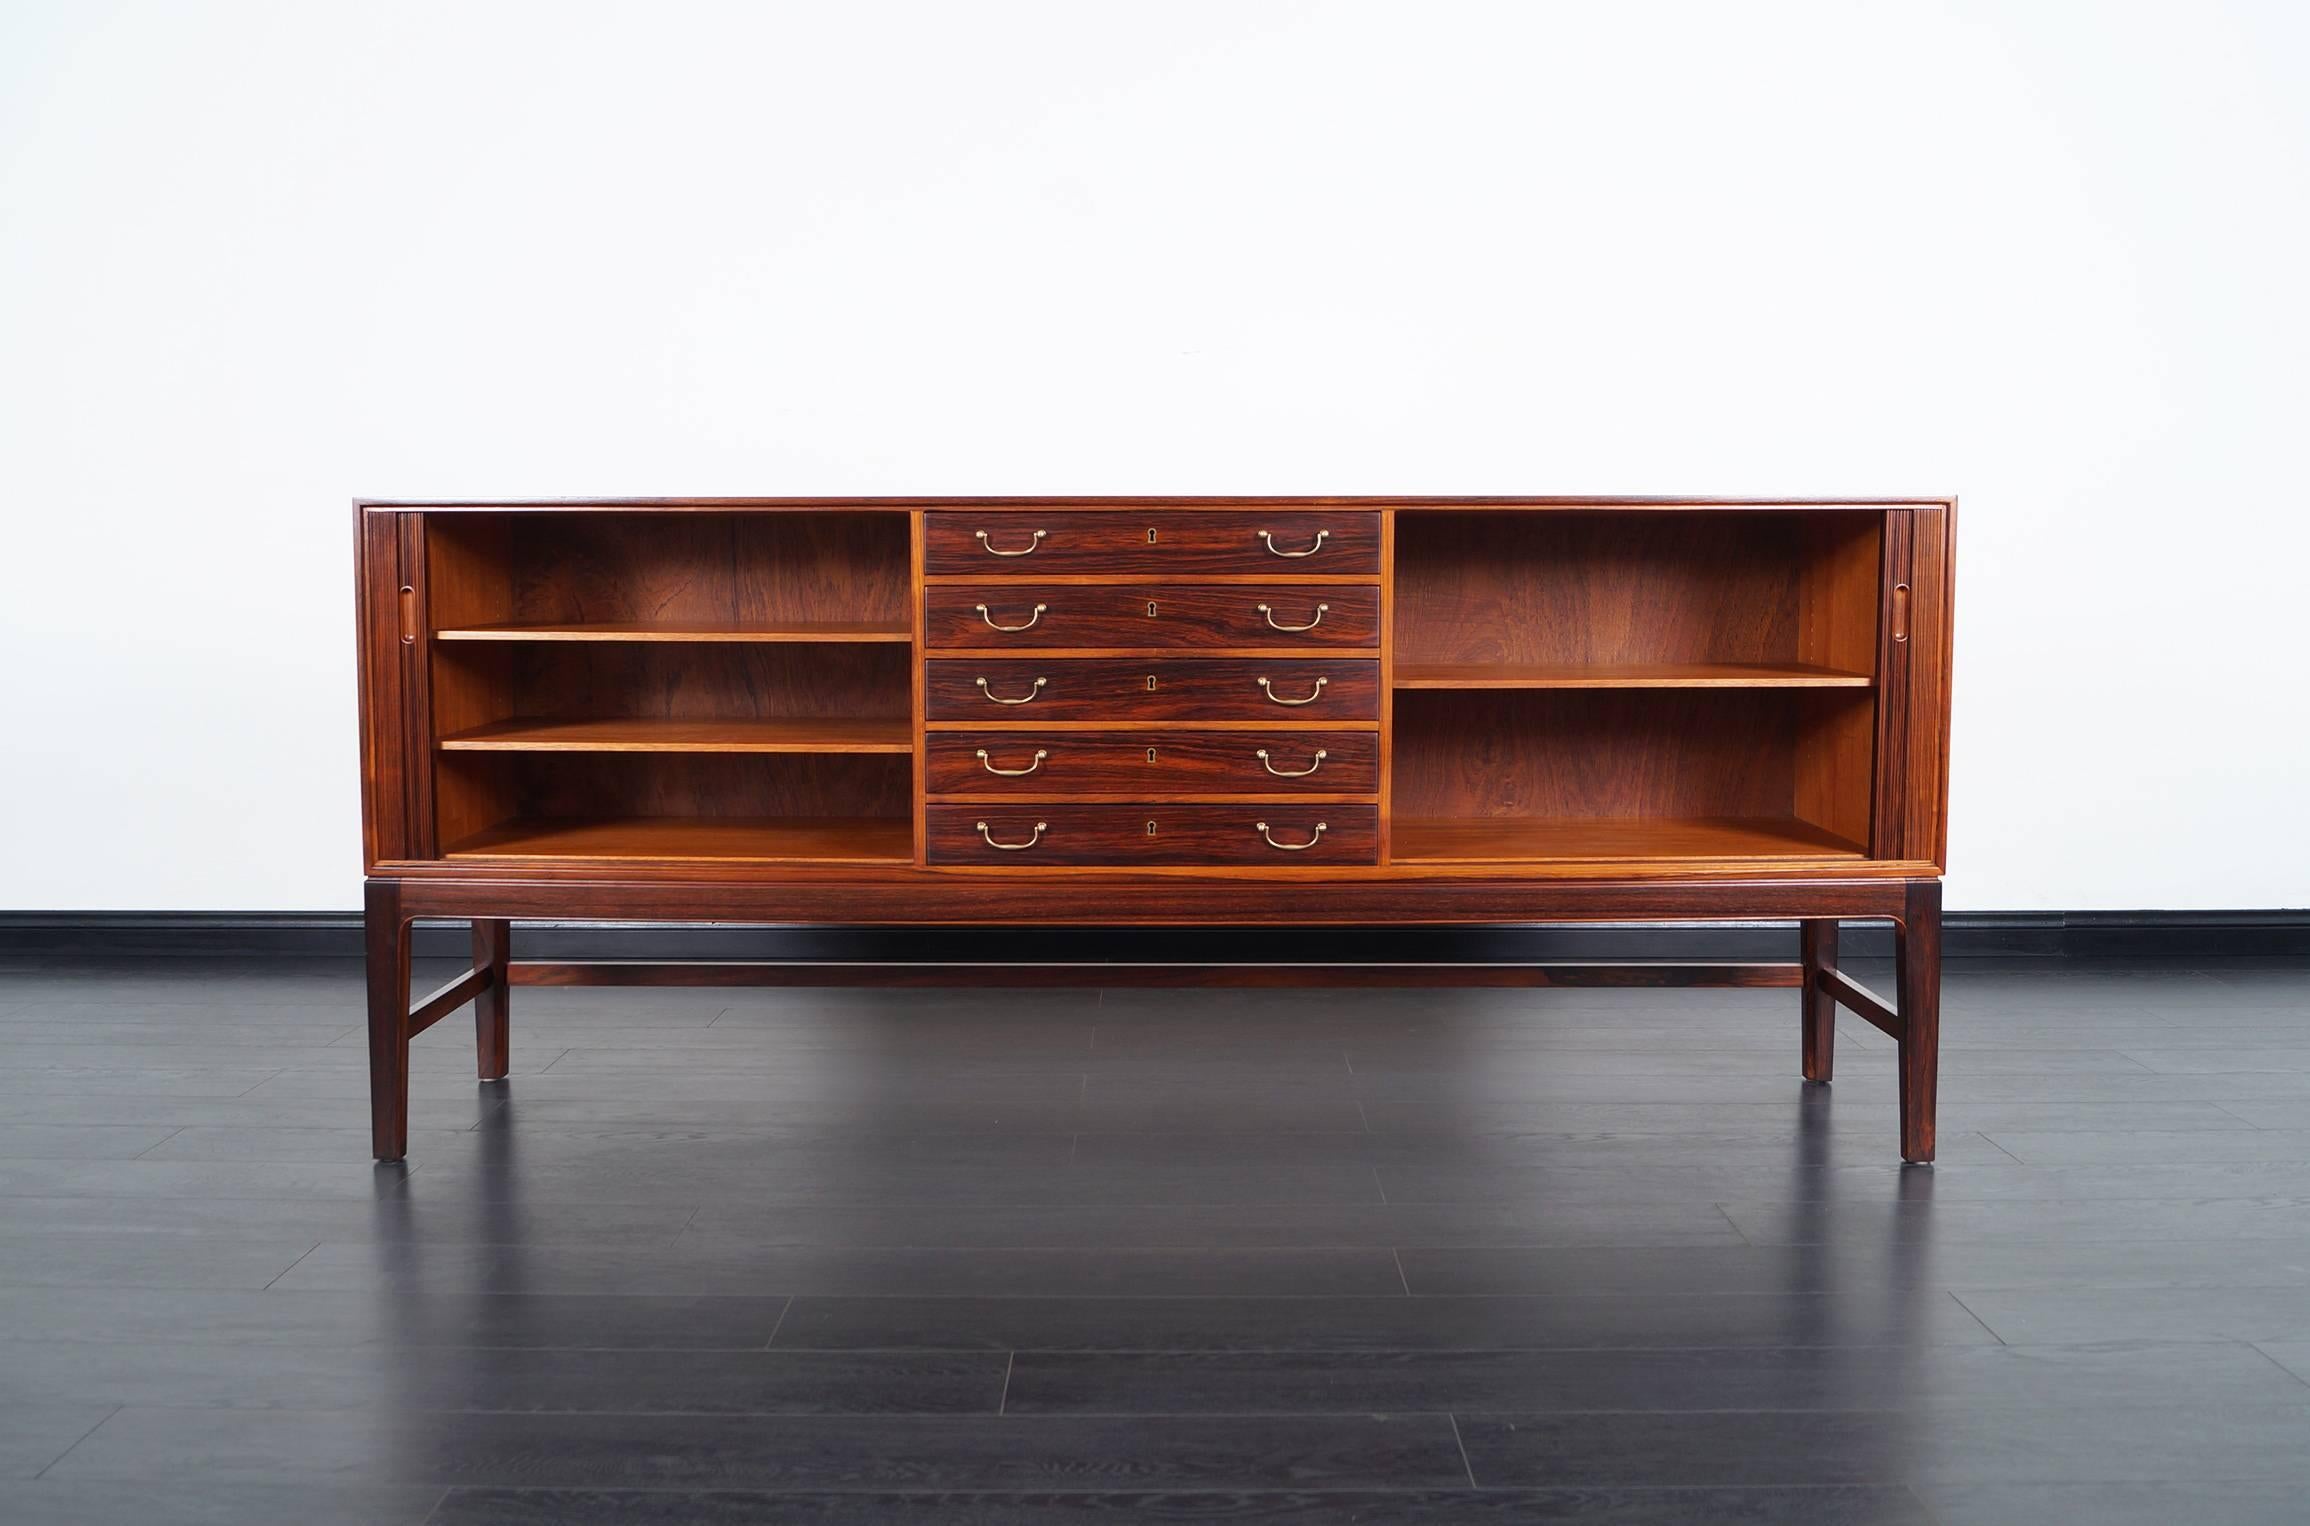 Stunning Danish Brazilian rosewood tambour doors credenza designed by Ole Wanscher for A.J. Iversen Snedkemester in Denmark, circa 1960s This beautiful credenza features two tambour doors with adjustable shelves and five pull-out dovetailed drawers